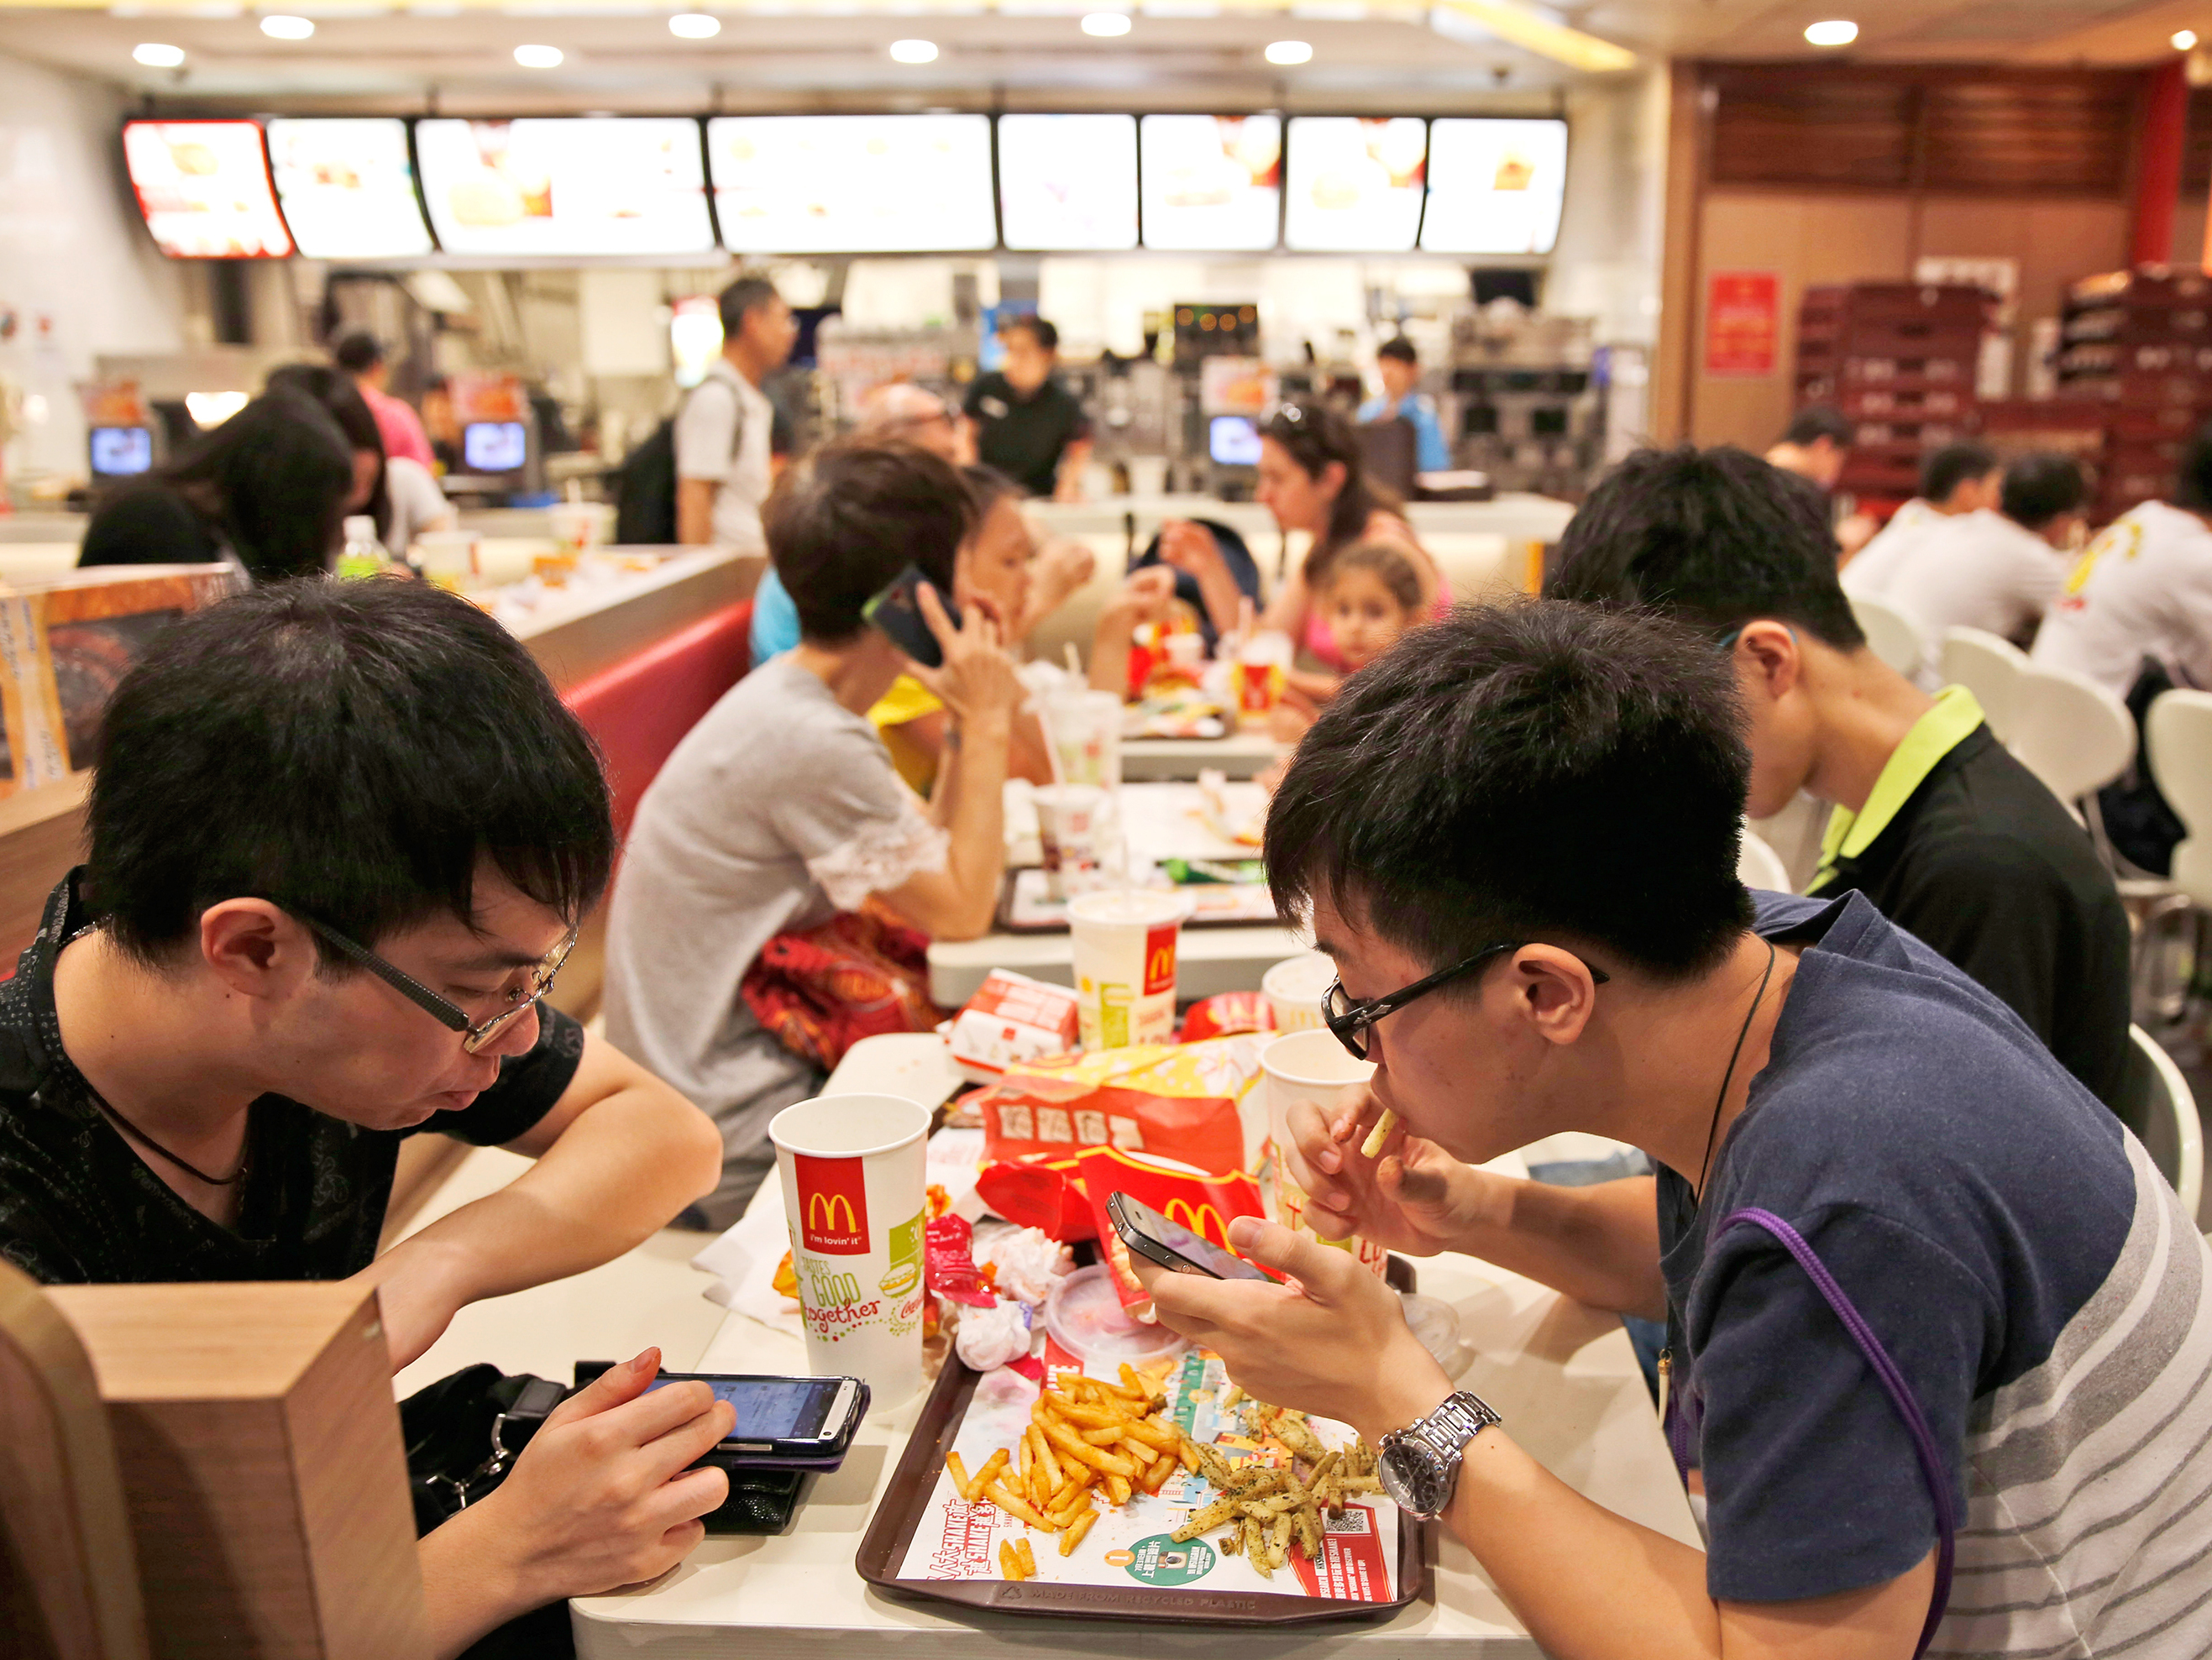 Customers eat at a McDonald's restaurant in Hong Kong Friday, July 25, 2014. McDonald's restaurants in Hong Kong have taken chicken nuggets and chicken filet burgers off the menu after a U.S.-owned supplier in mainland China was accused of selling expired meat. Photo: Kin Cheung/AP